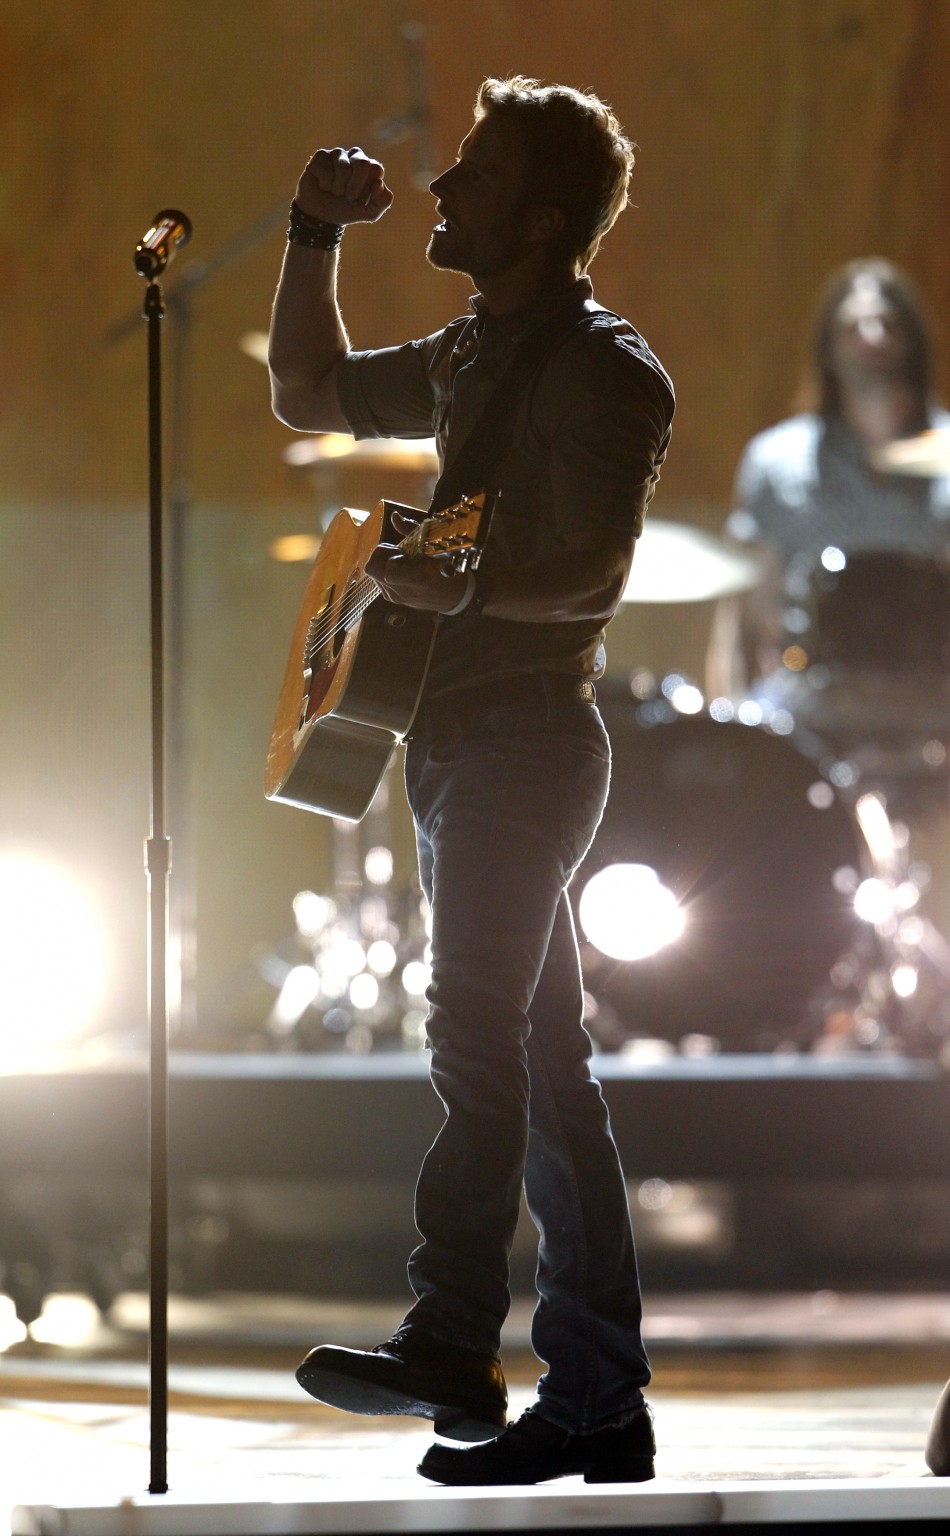 Dierks Bentley performs quotHomequot at the 47th annual Academy of Country Music Awards in Las Vegas